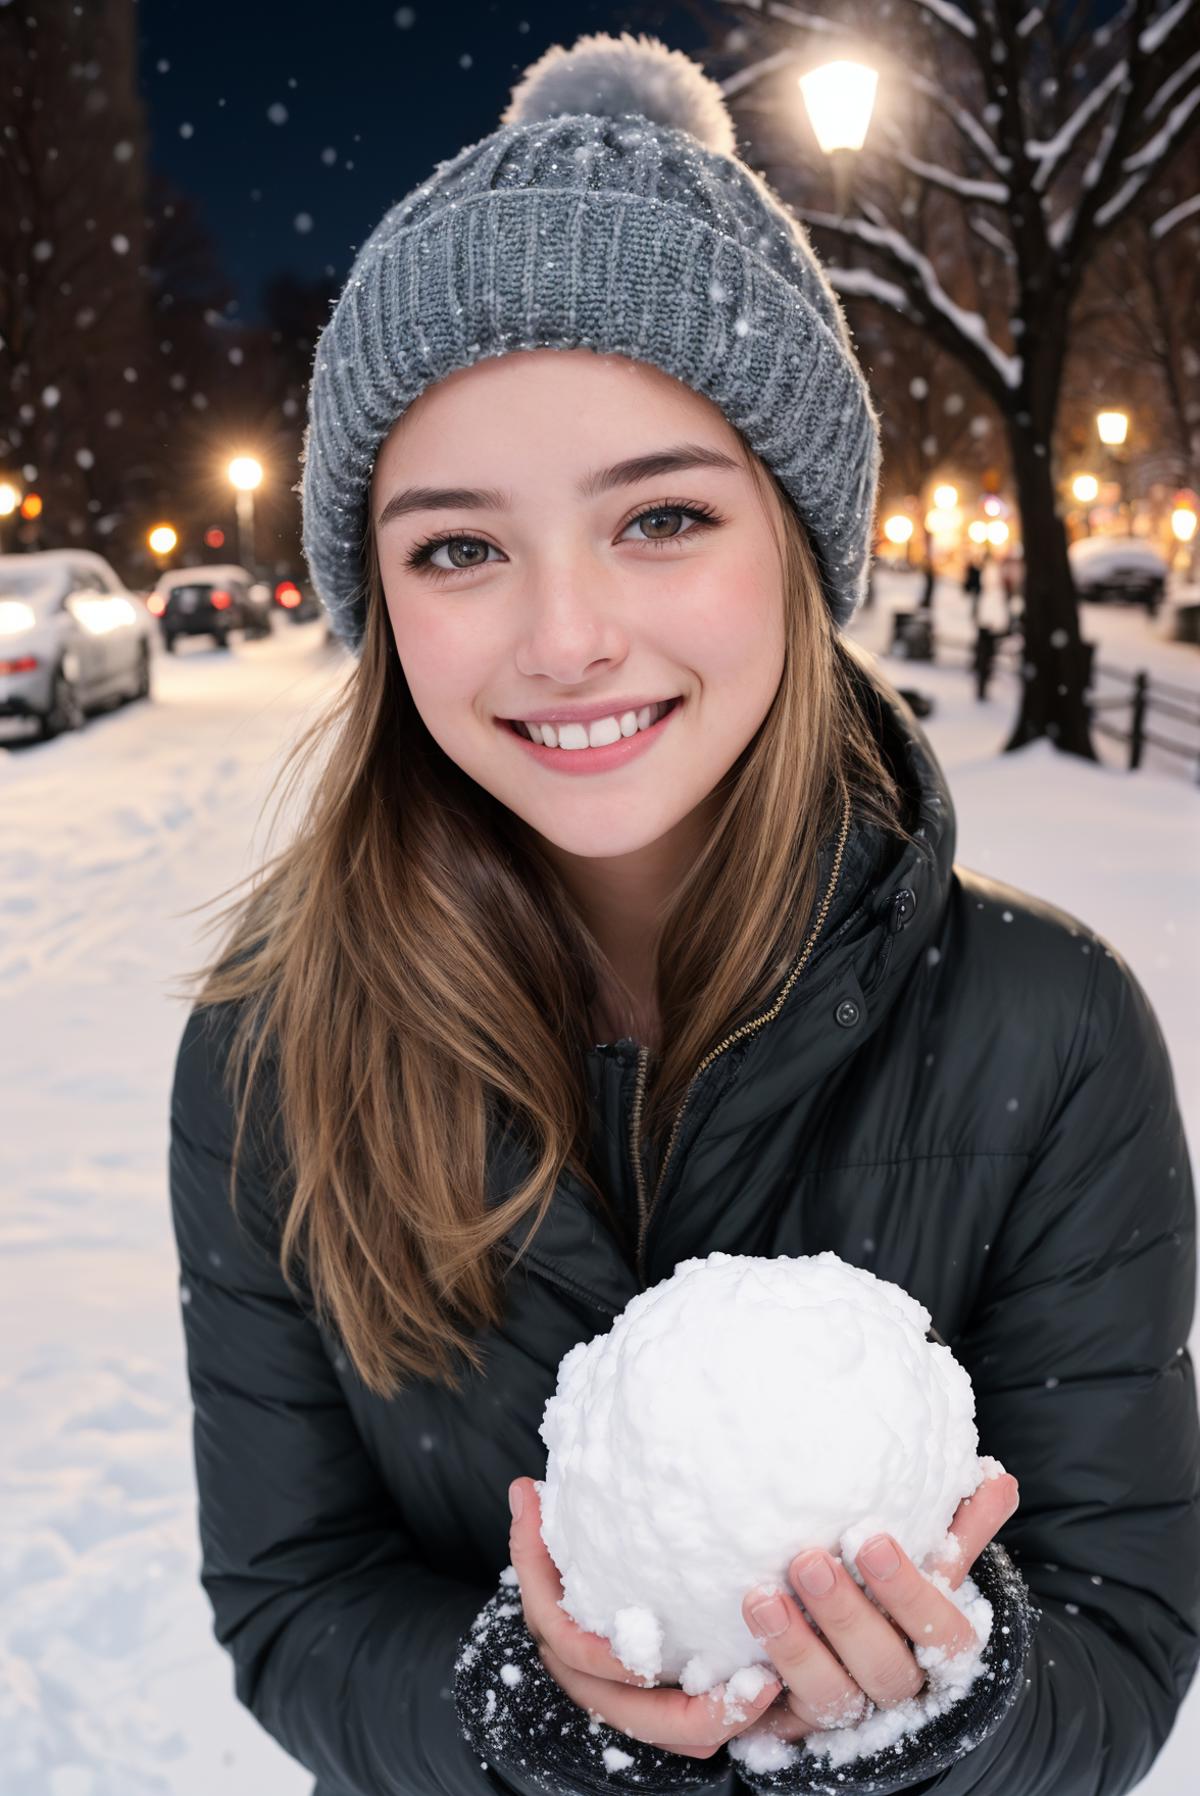 A woman wearing a gray hat and coat holds a snowball in front of her.